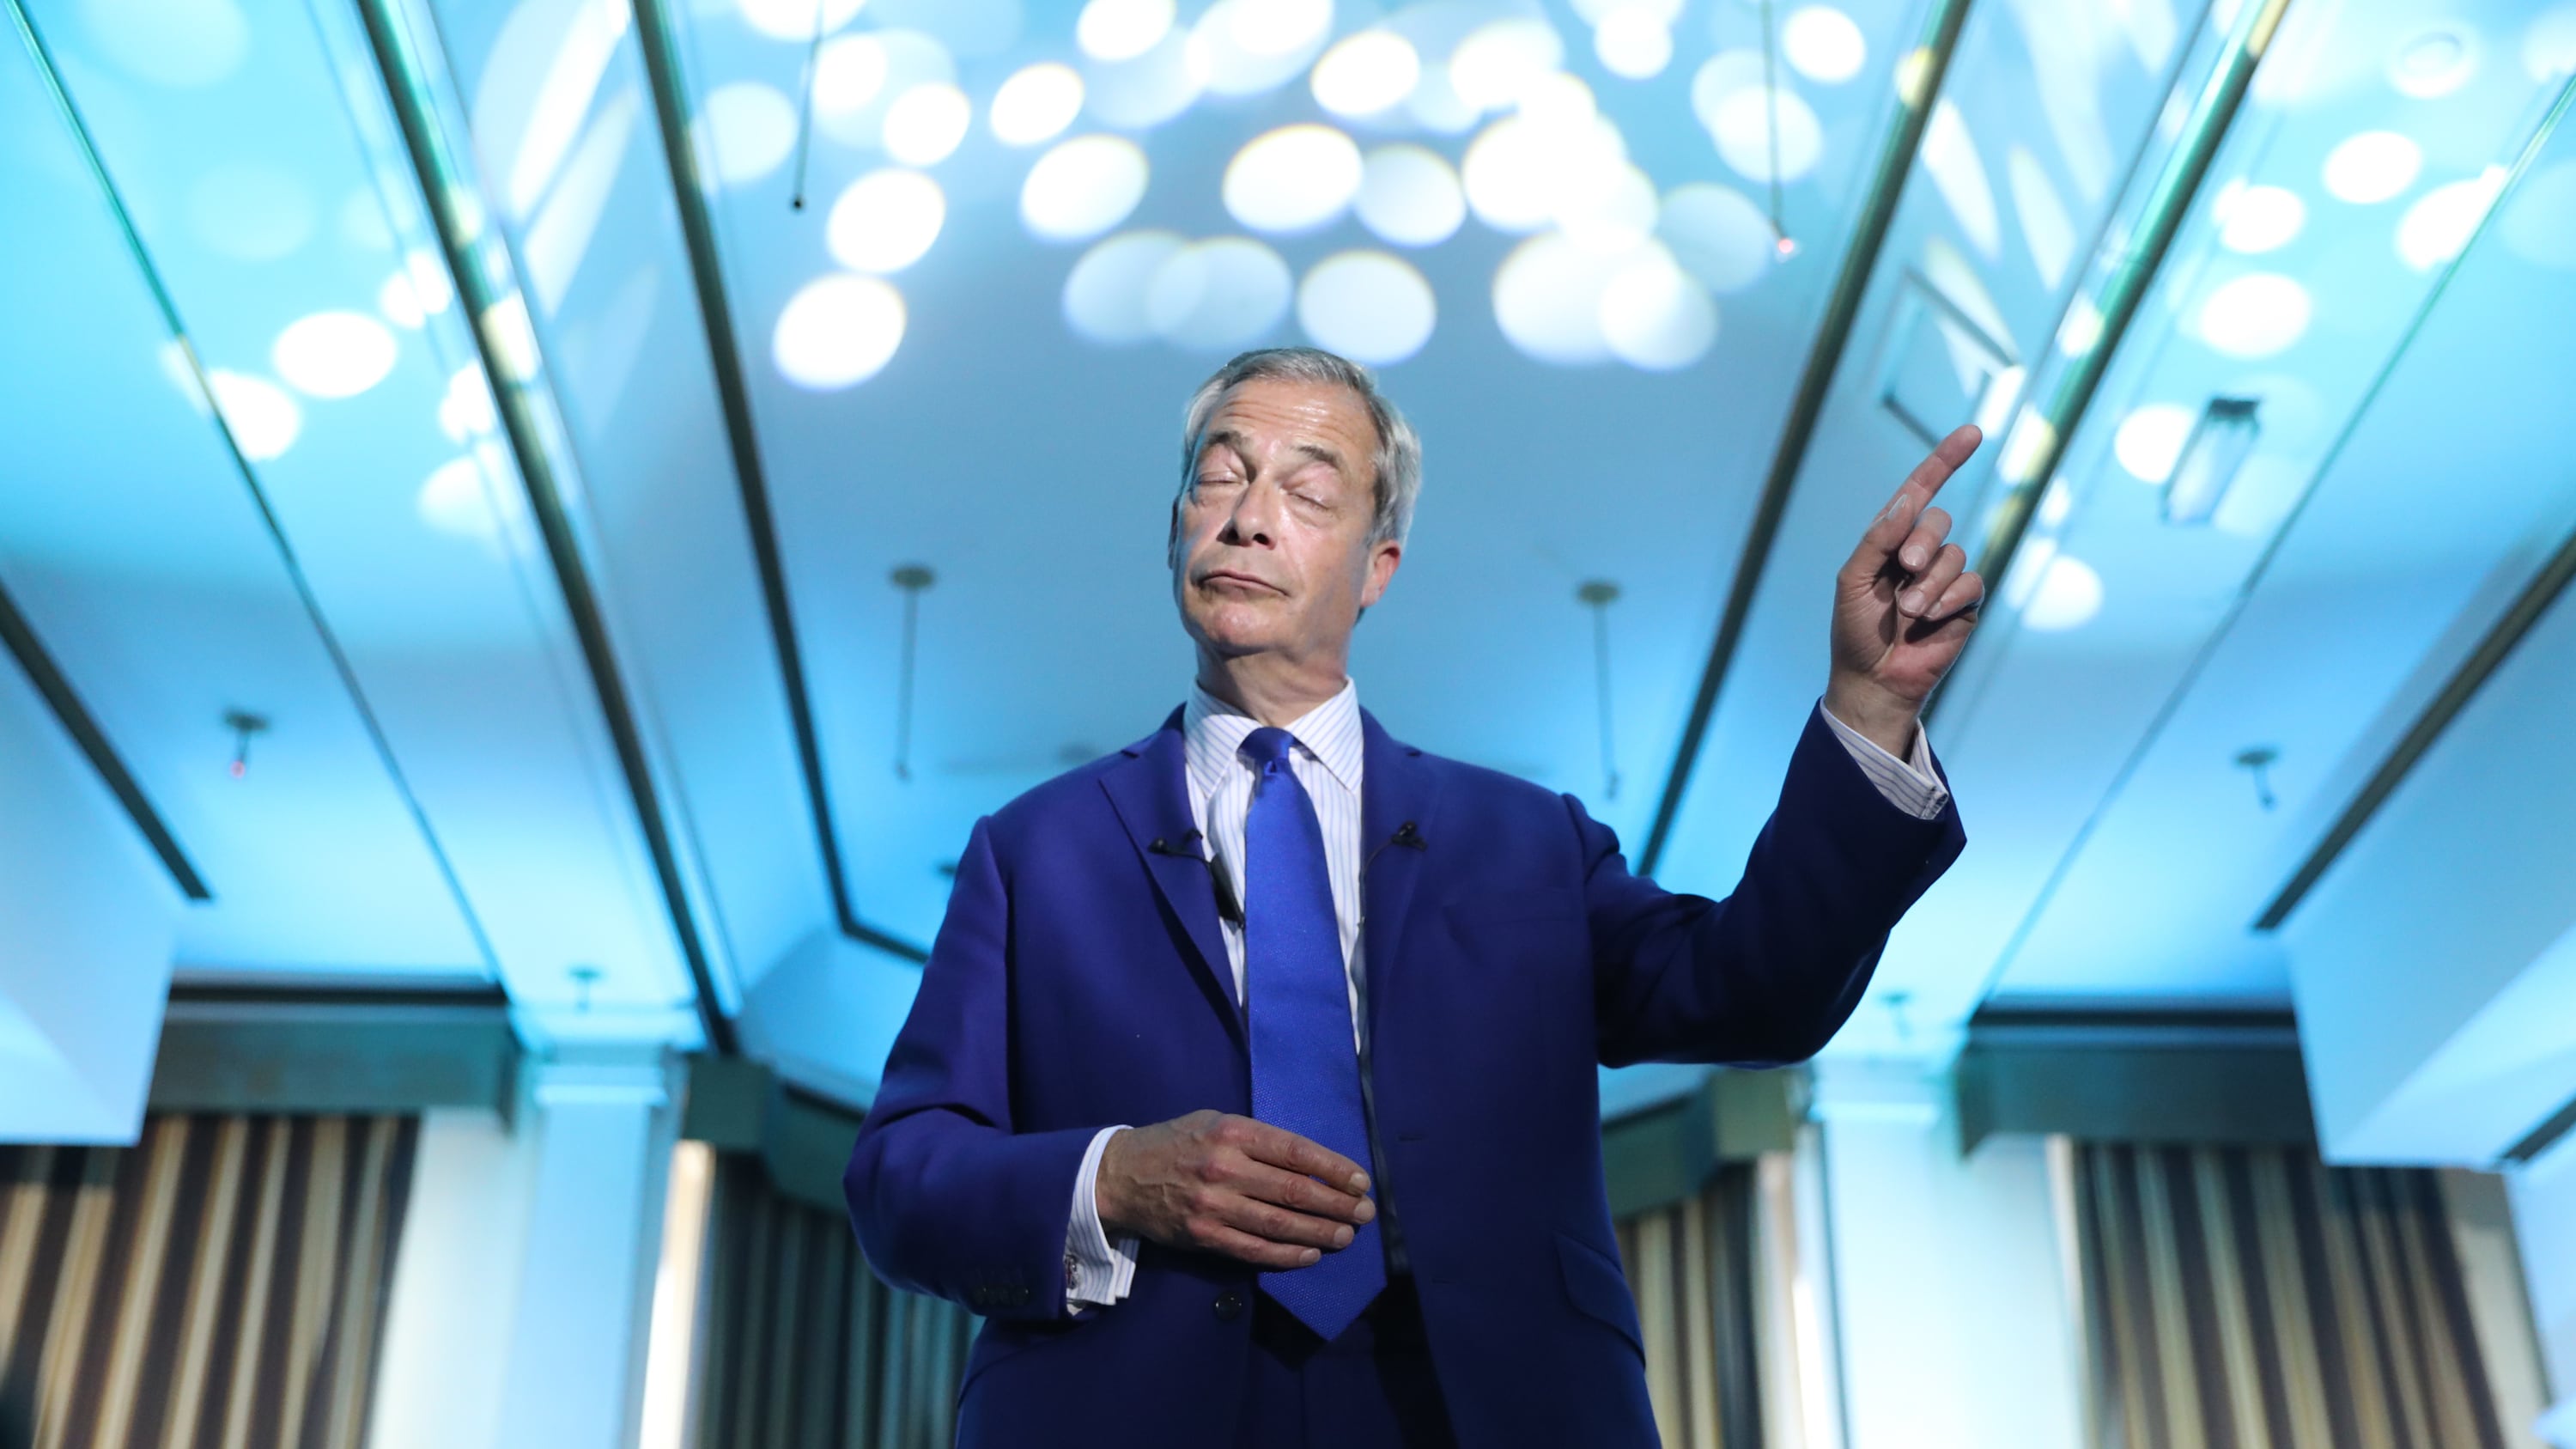 Reform UK leader Nigel Farage speaks at an event at the Imperial Hotel in Blackpool